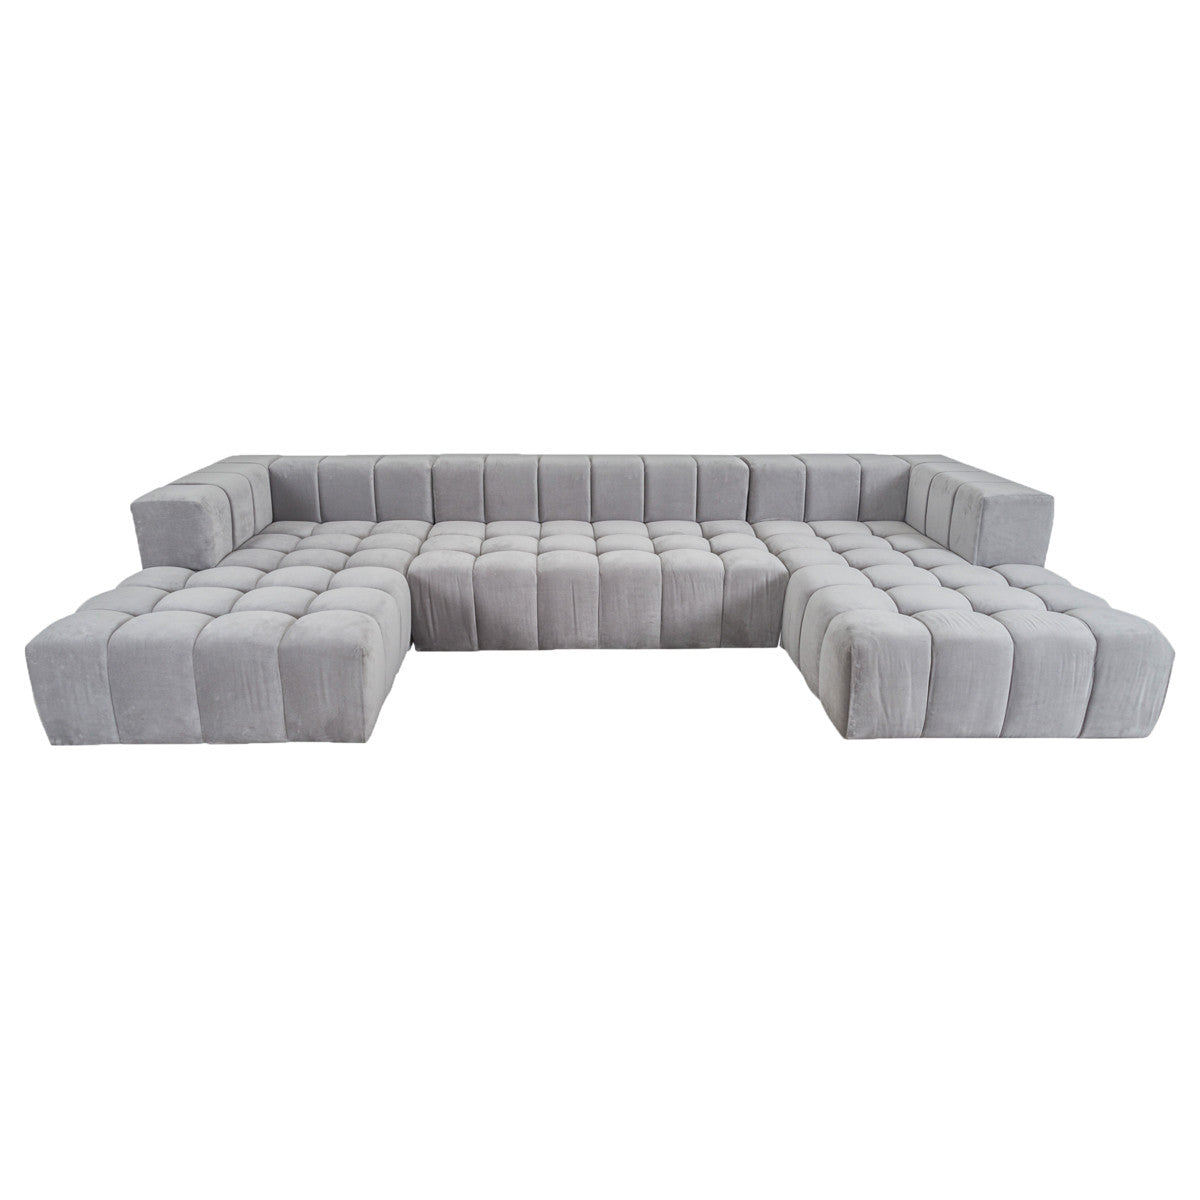 Modular light gray upholstered sectional sofa with double chaise lounges, a low back, straight sides, button tufted cushions and a channel tufted back.